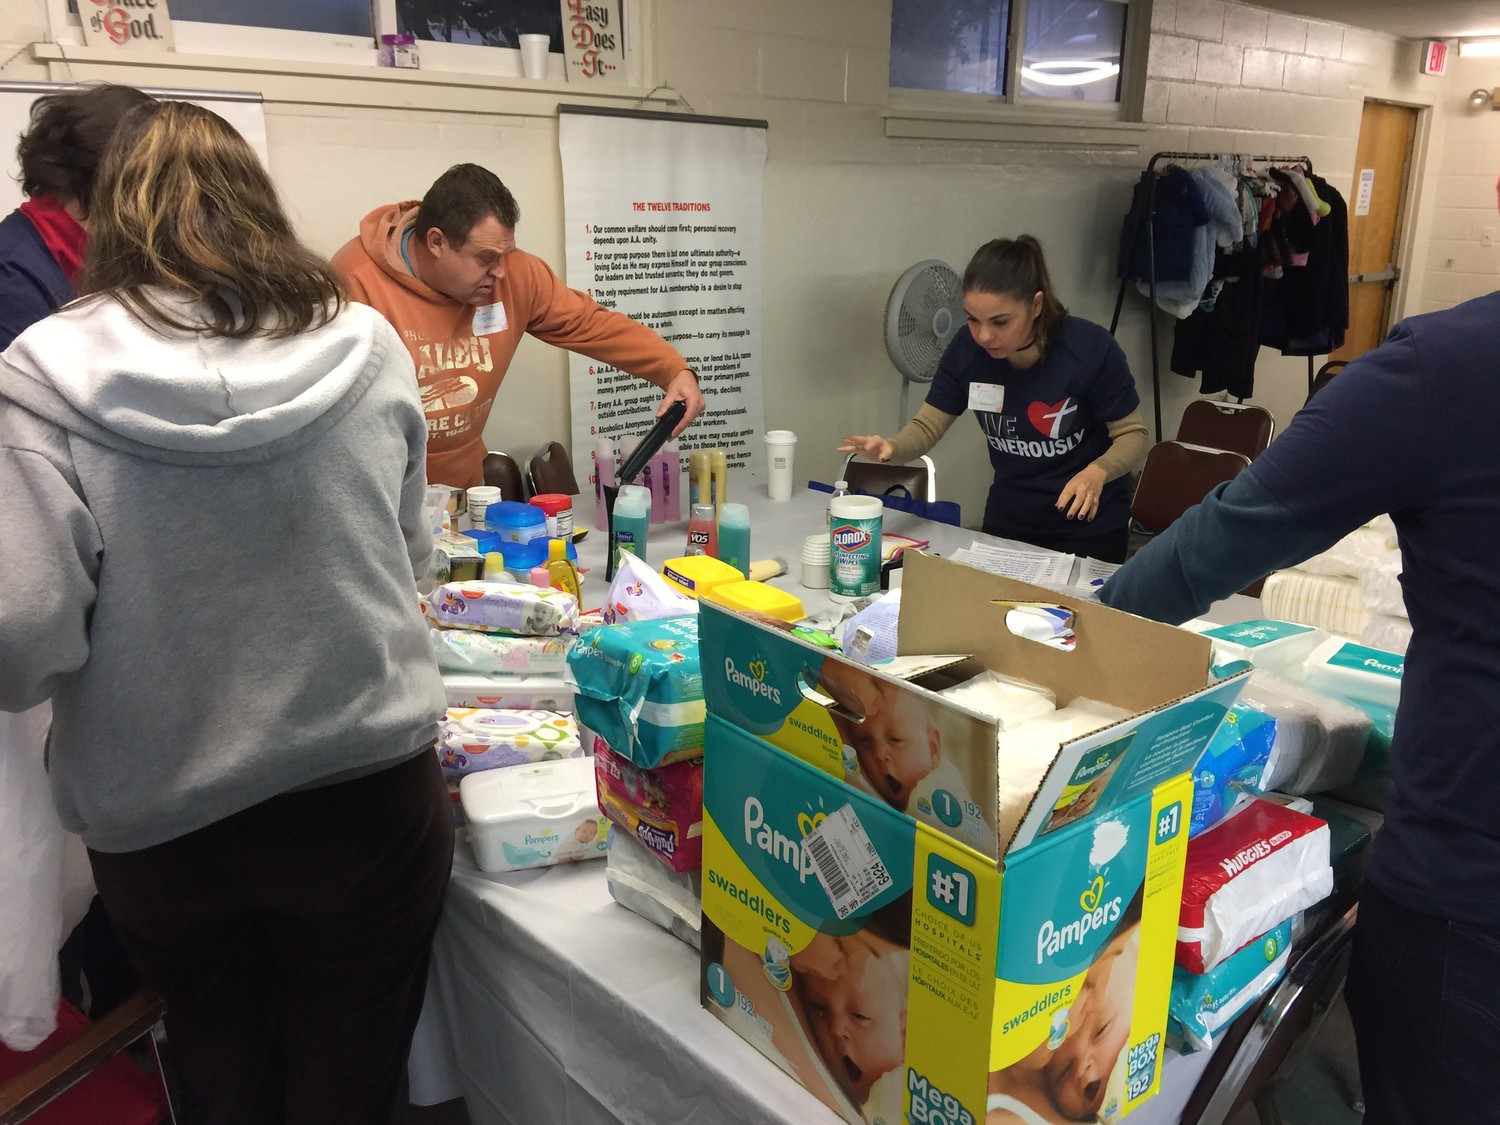 Courtesy of the church of St Jude.
Volunteer Steven Reichert and Volunteer Coordinator Erica Parrinello, at left, wsorted through donations at the Mother and Child Ministry.